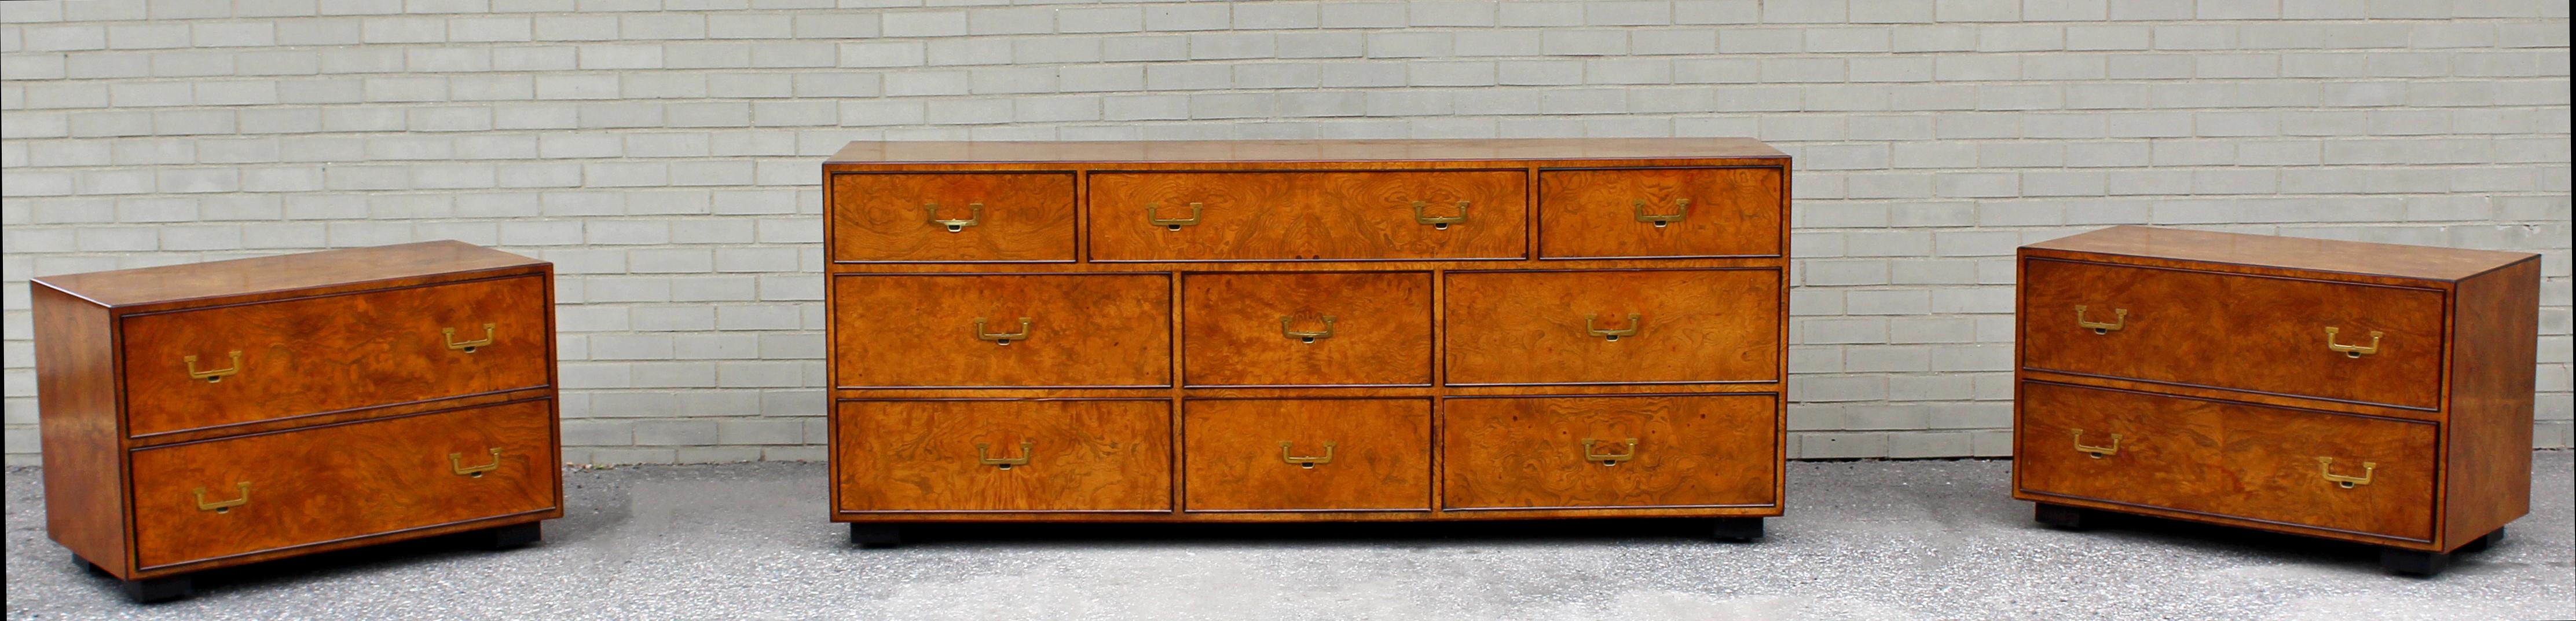 For your consideration is a phenomenal burl wood bedroom set, including a dresser and pair of nightstands, with brass pulls, by John Widdicomb, circa 1960s. All pieces are on ball joints for easy maneuverability. In very good vintage condition. The